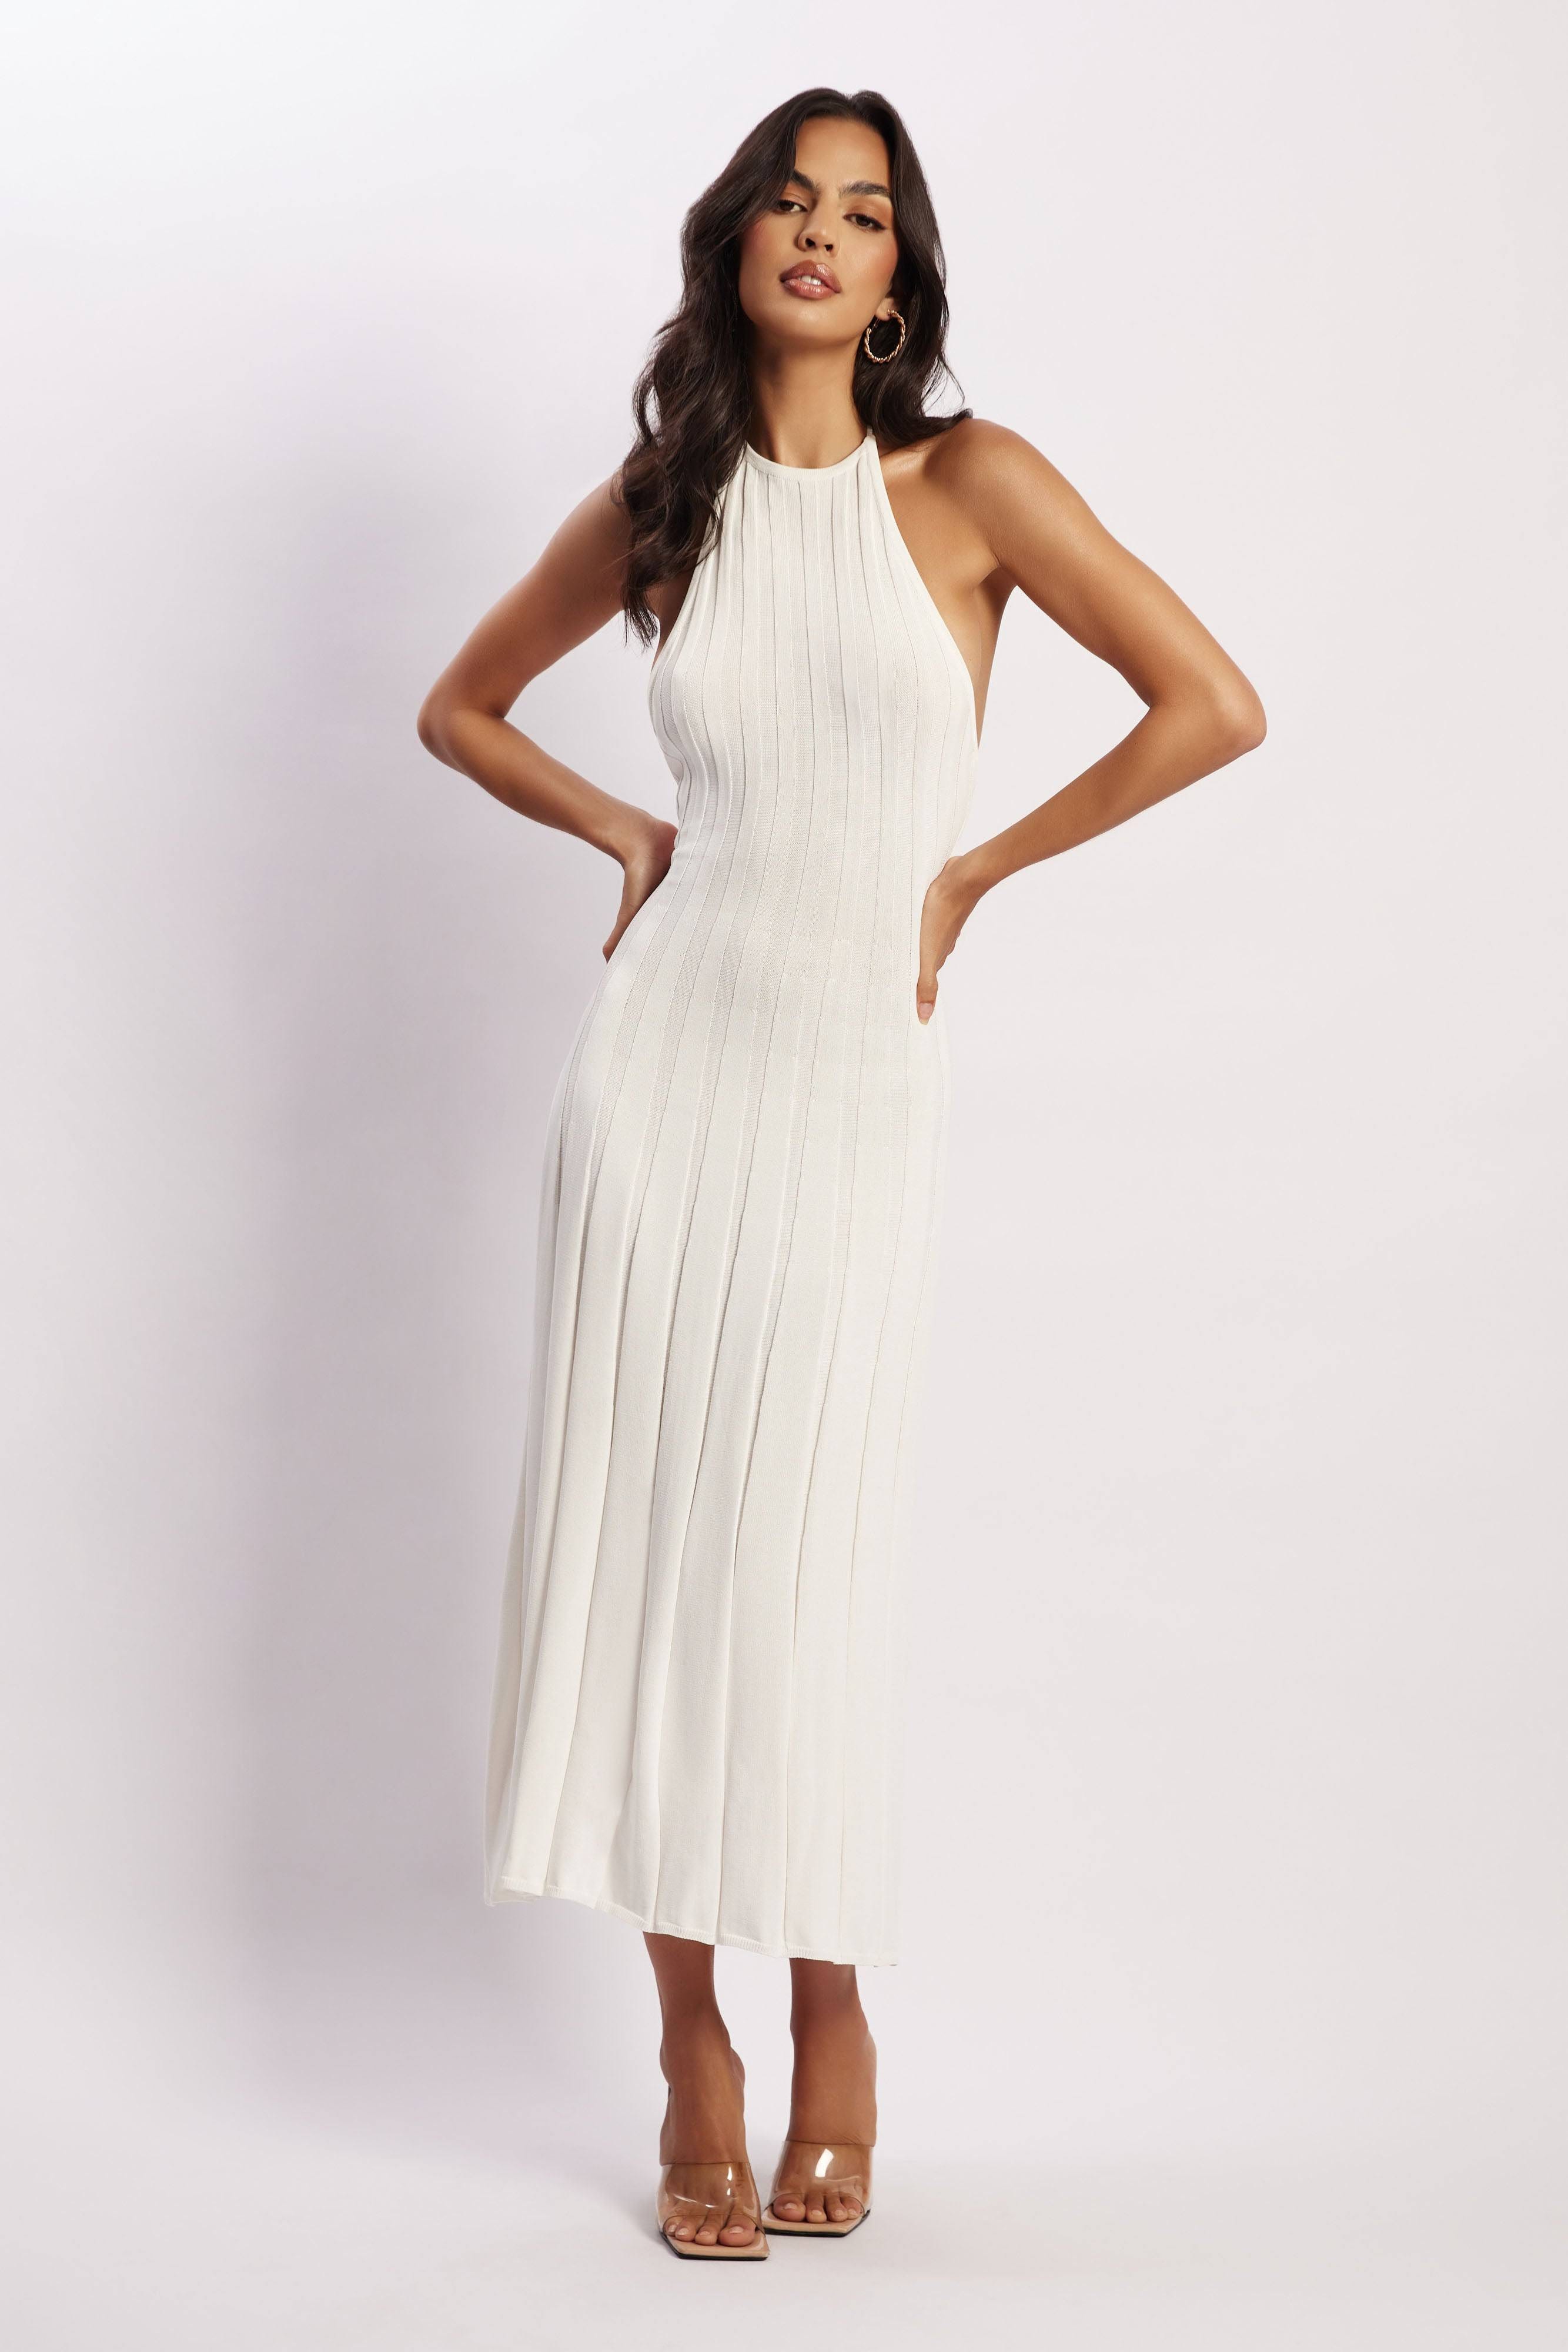 Sophisticated Adrienne Halter Neck Midi Dress for 18th Birthday Celebrations | Image